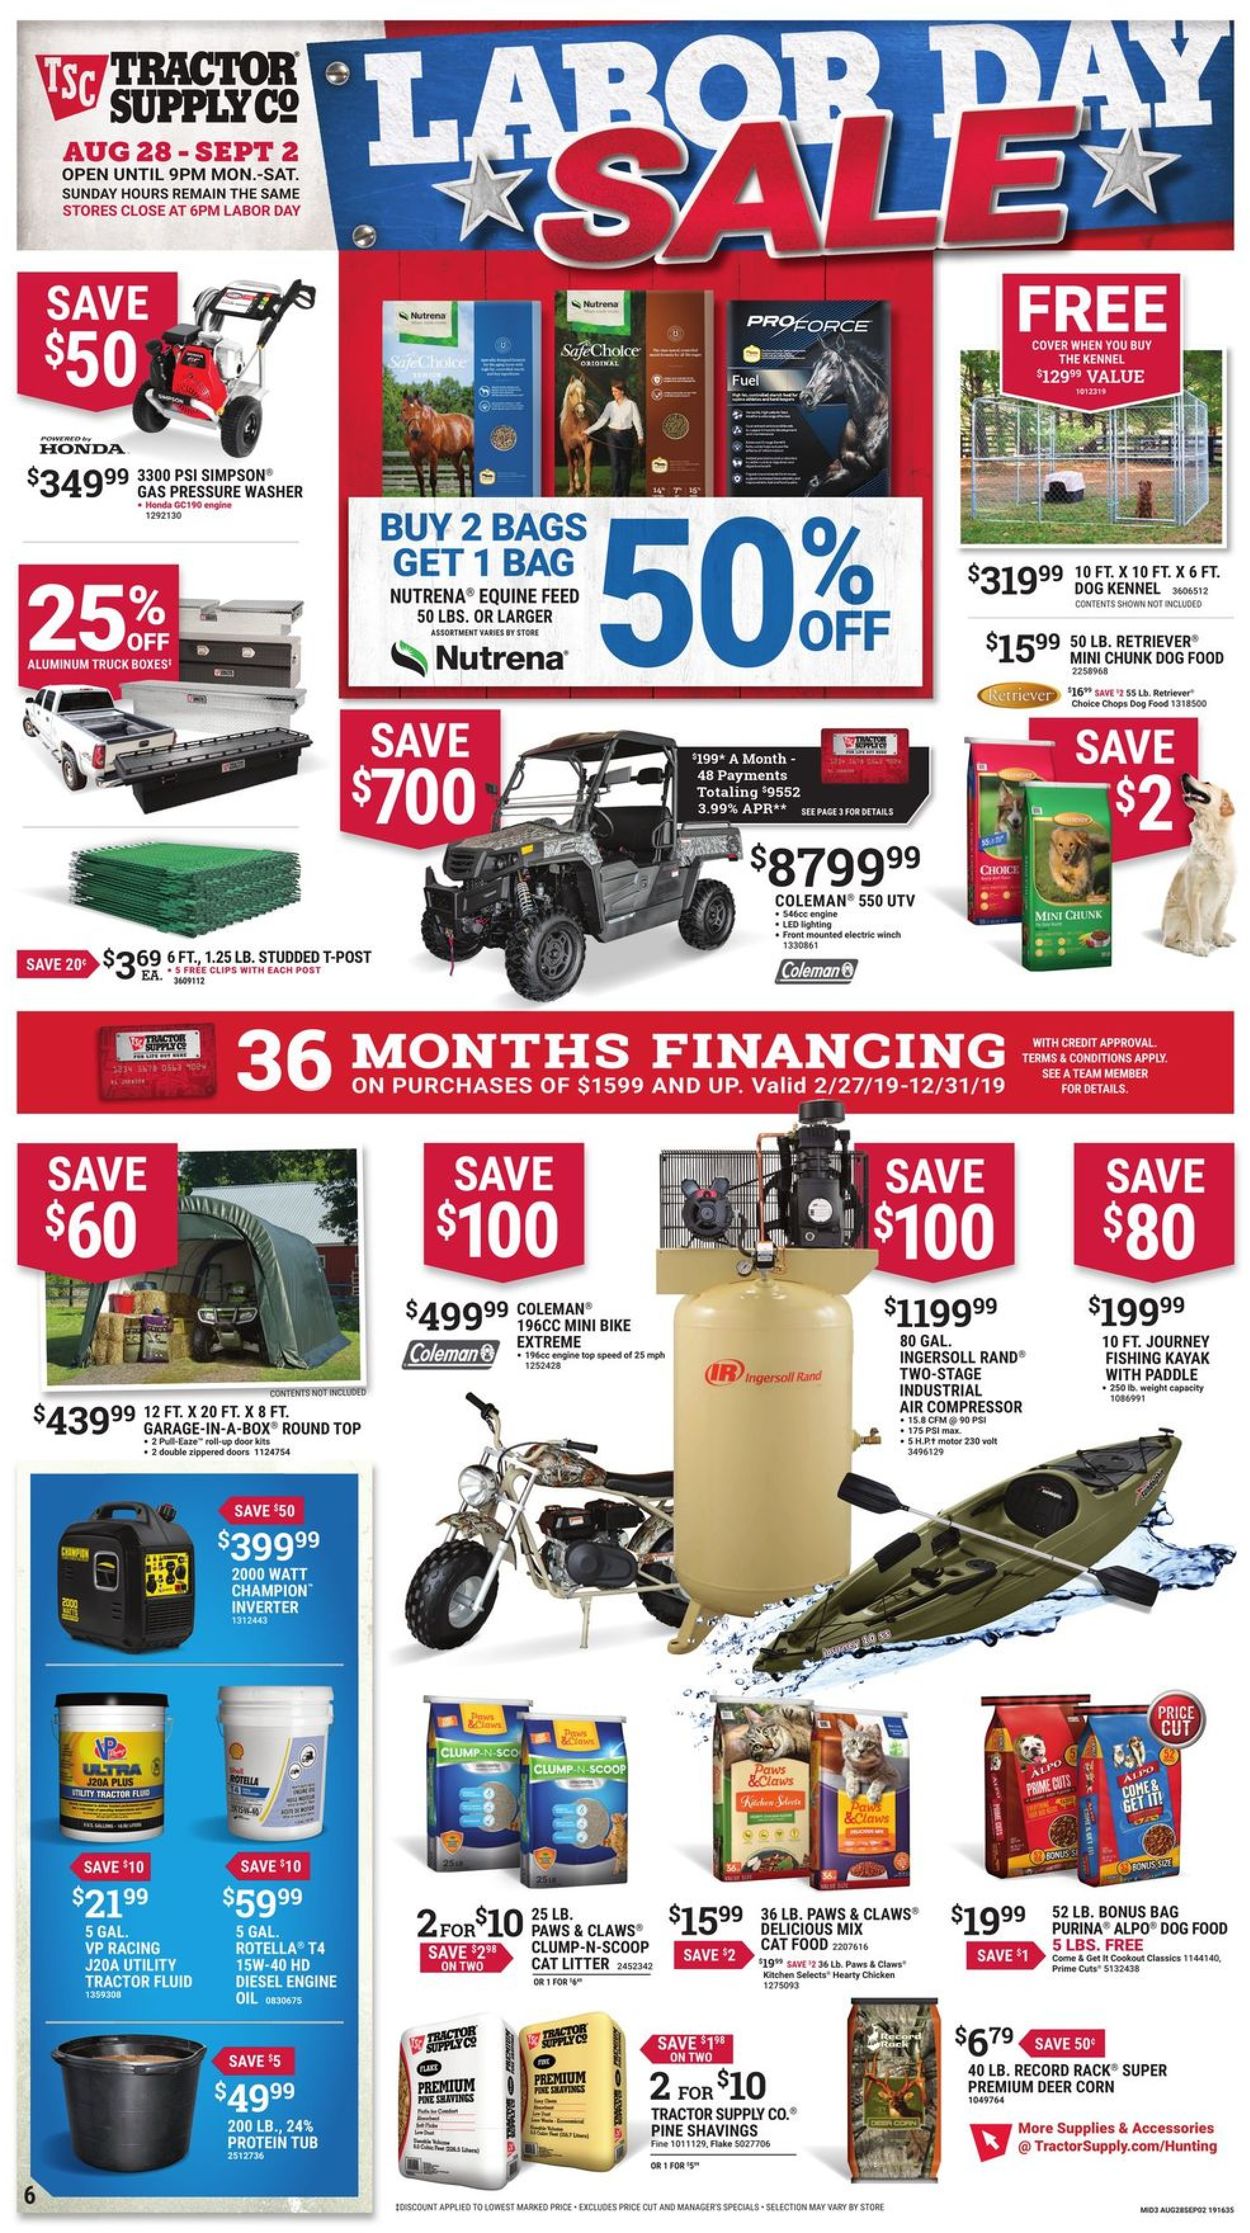 Tractor Supply Current weekly ad 08/28 09/02/2019 [6]